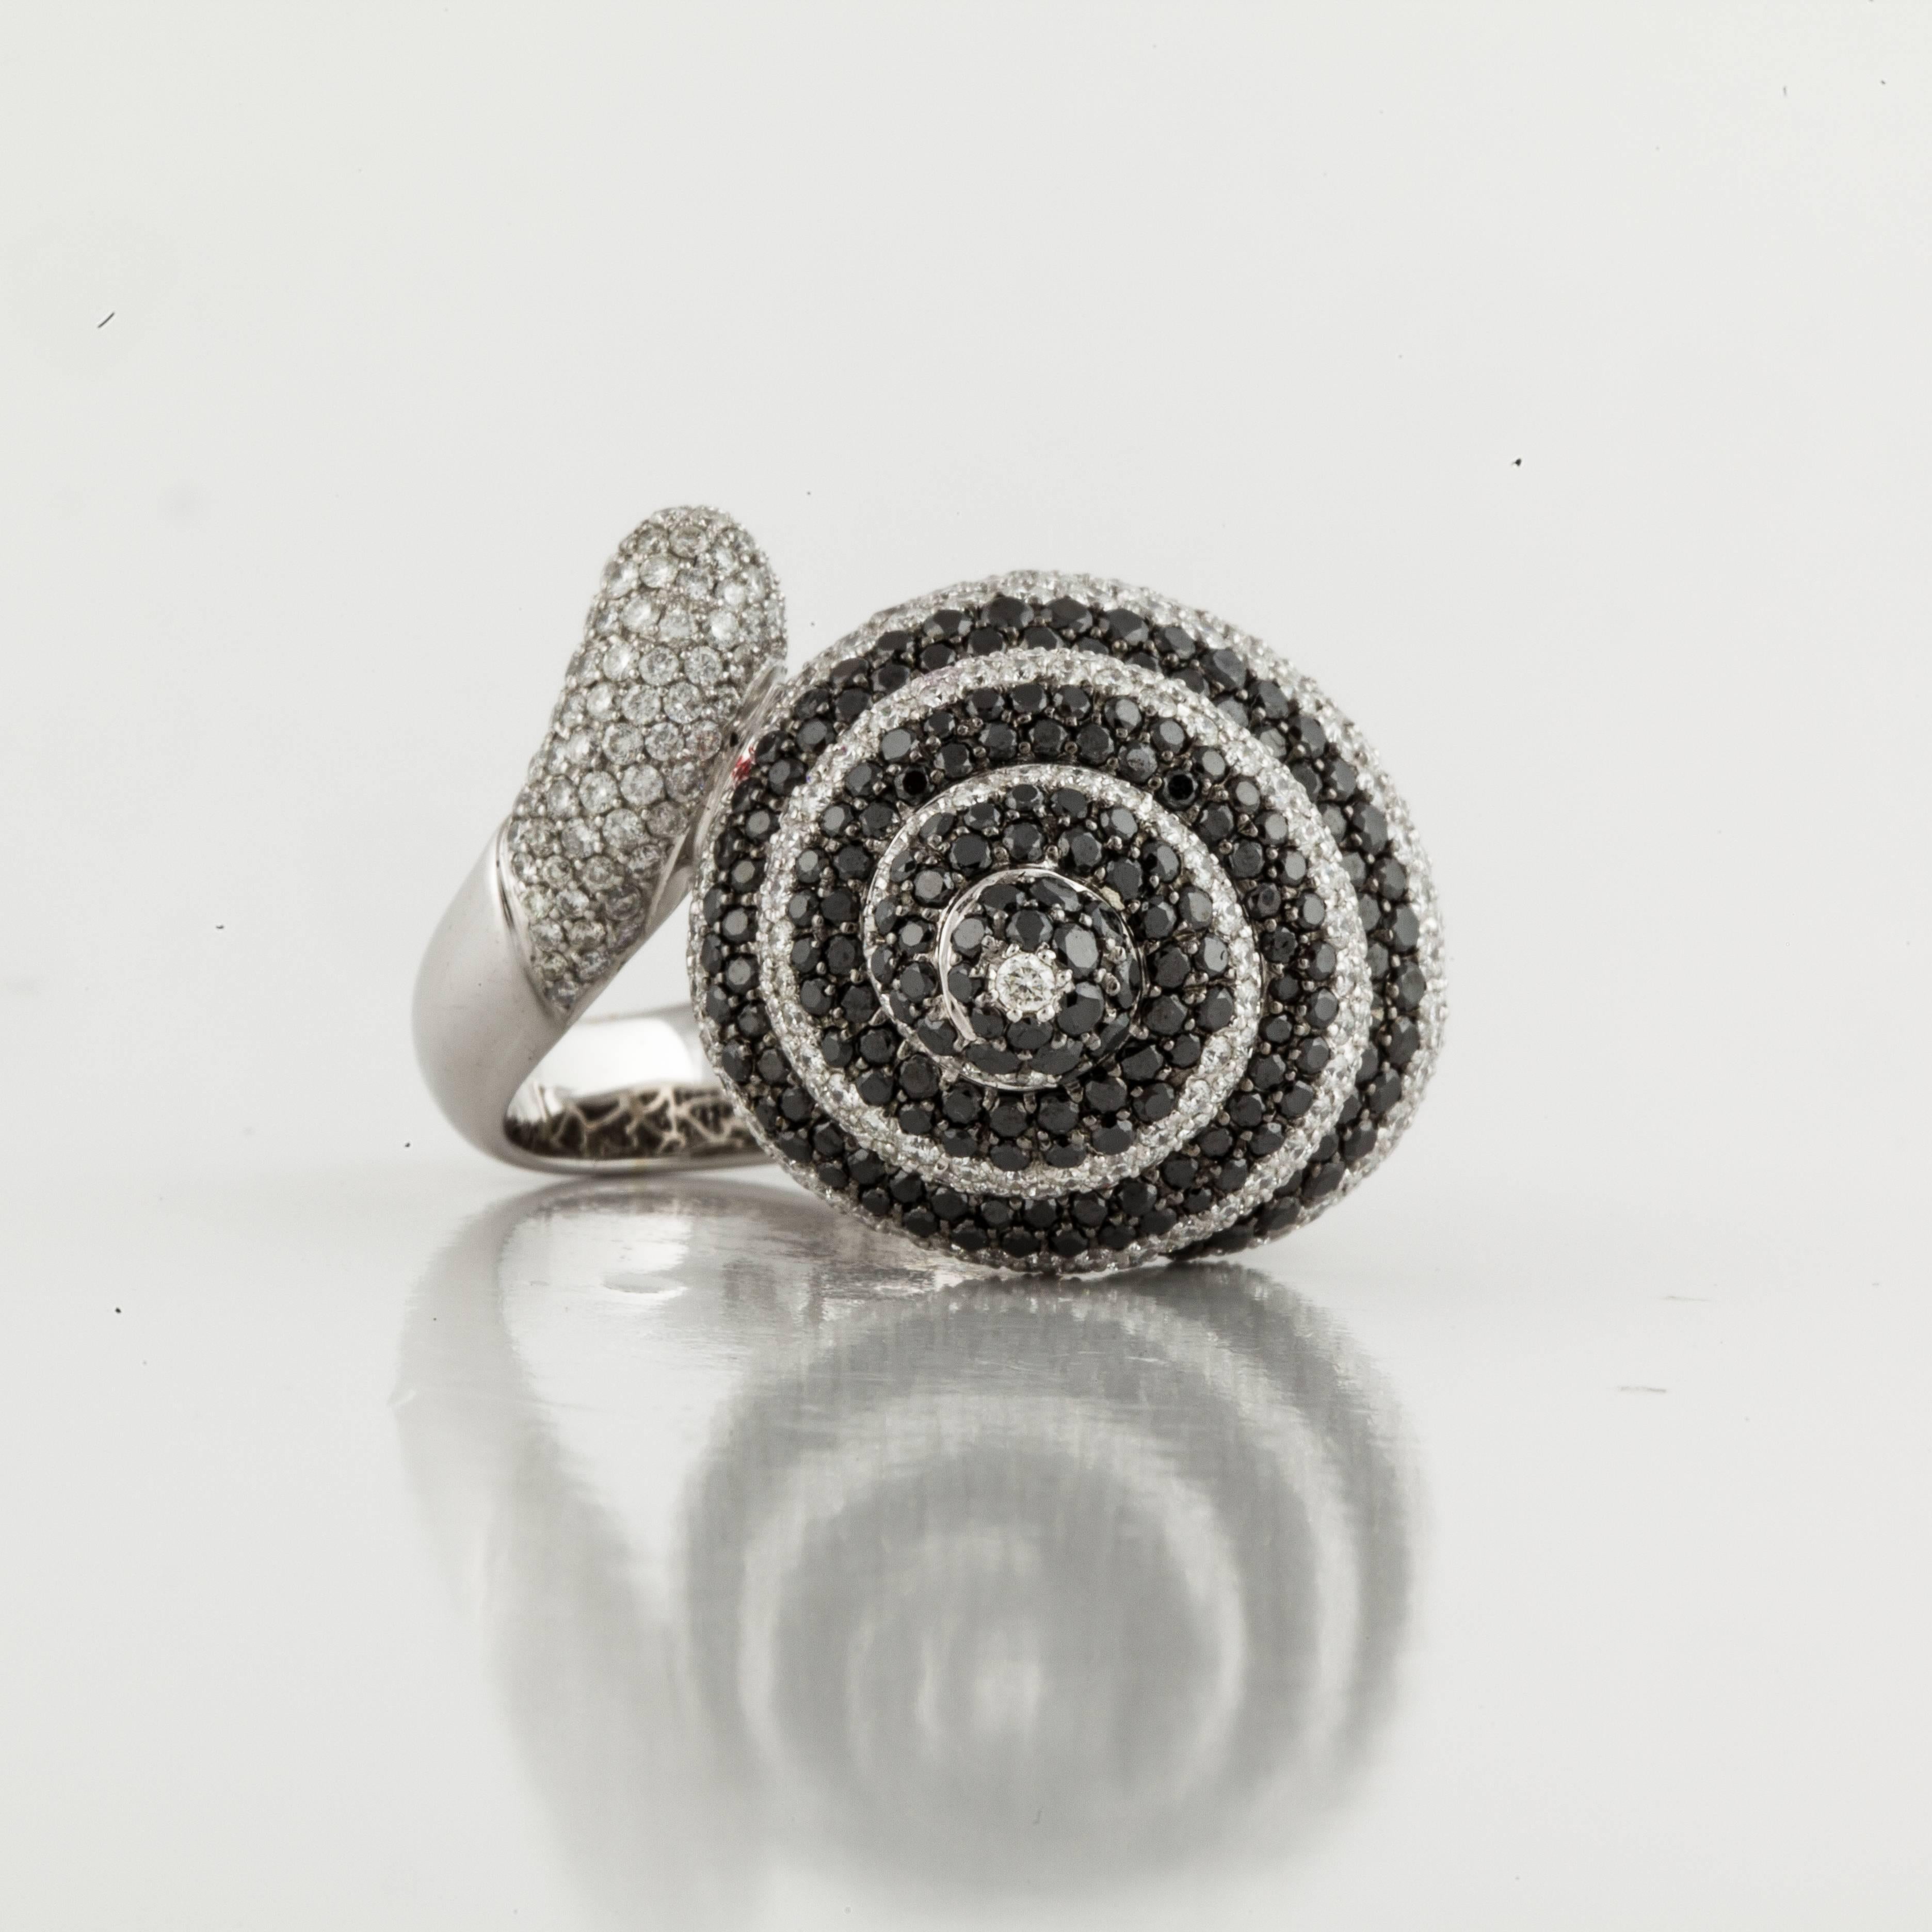 Odelia ring in 18K white gold depicting a shell with black and white diamonds.  The ring is stamped 